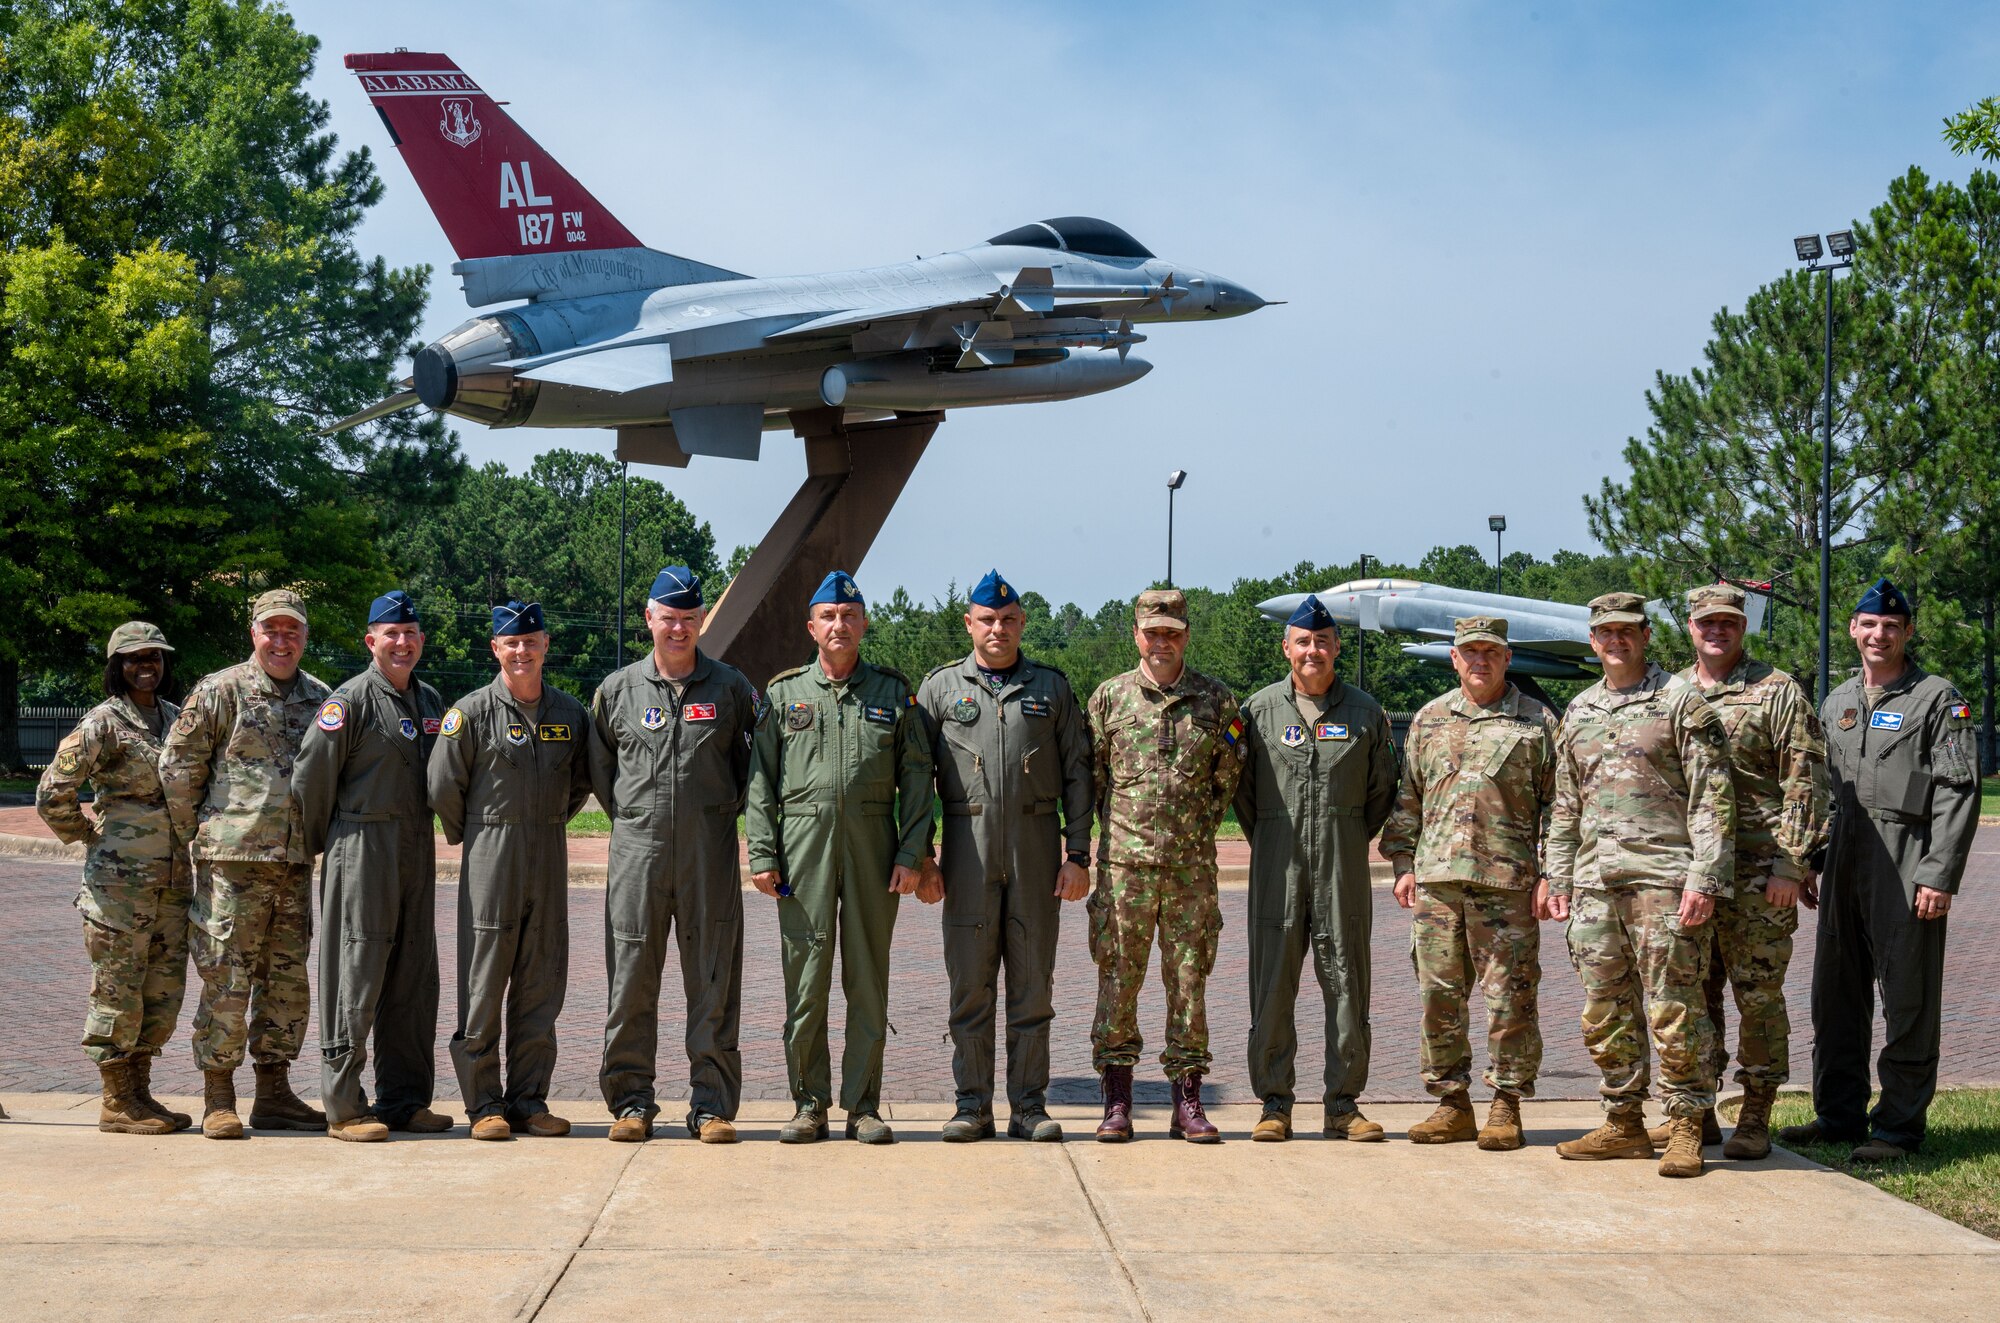 This year marks the 30th anniversary of the State Partnership Program between Alabama’s 187th Fighter Wing and the Romanian Air Force.